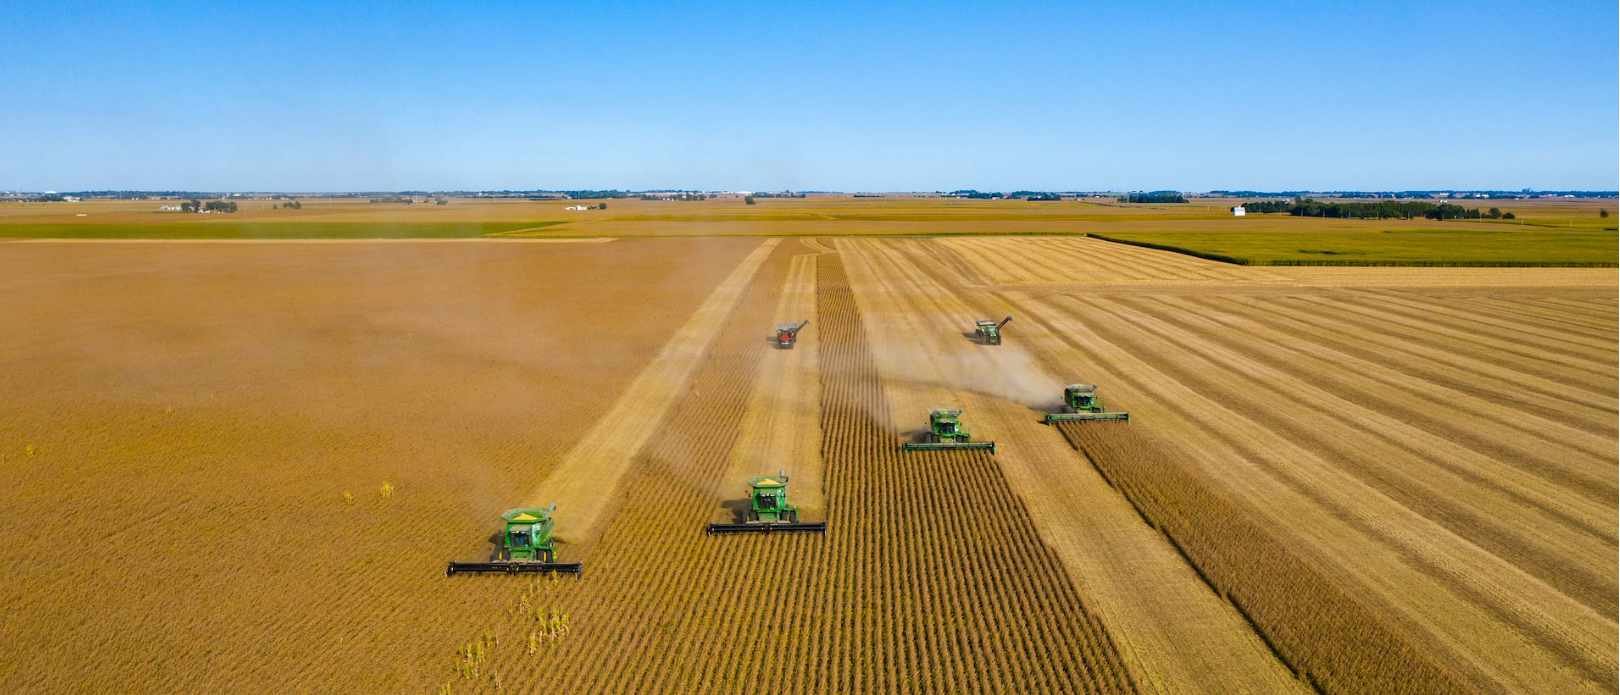 Six green harvesters moving across large agricultural field. 